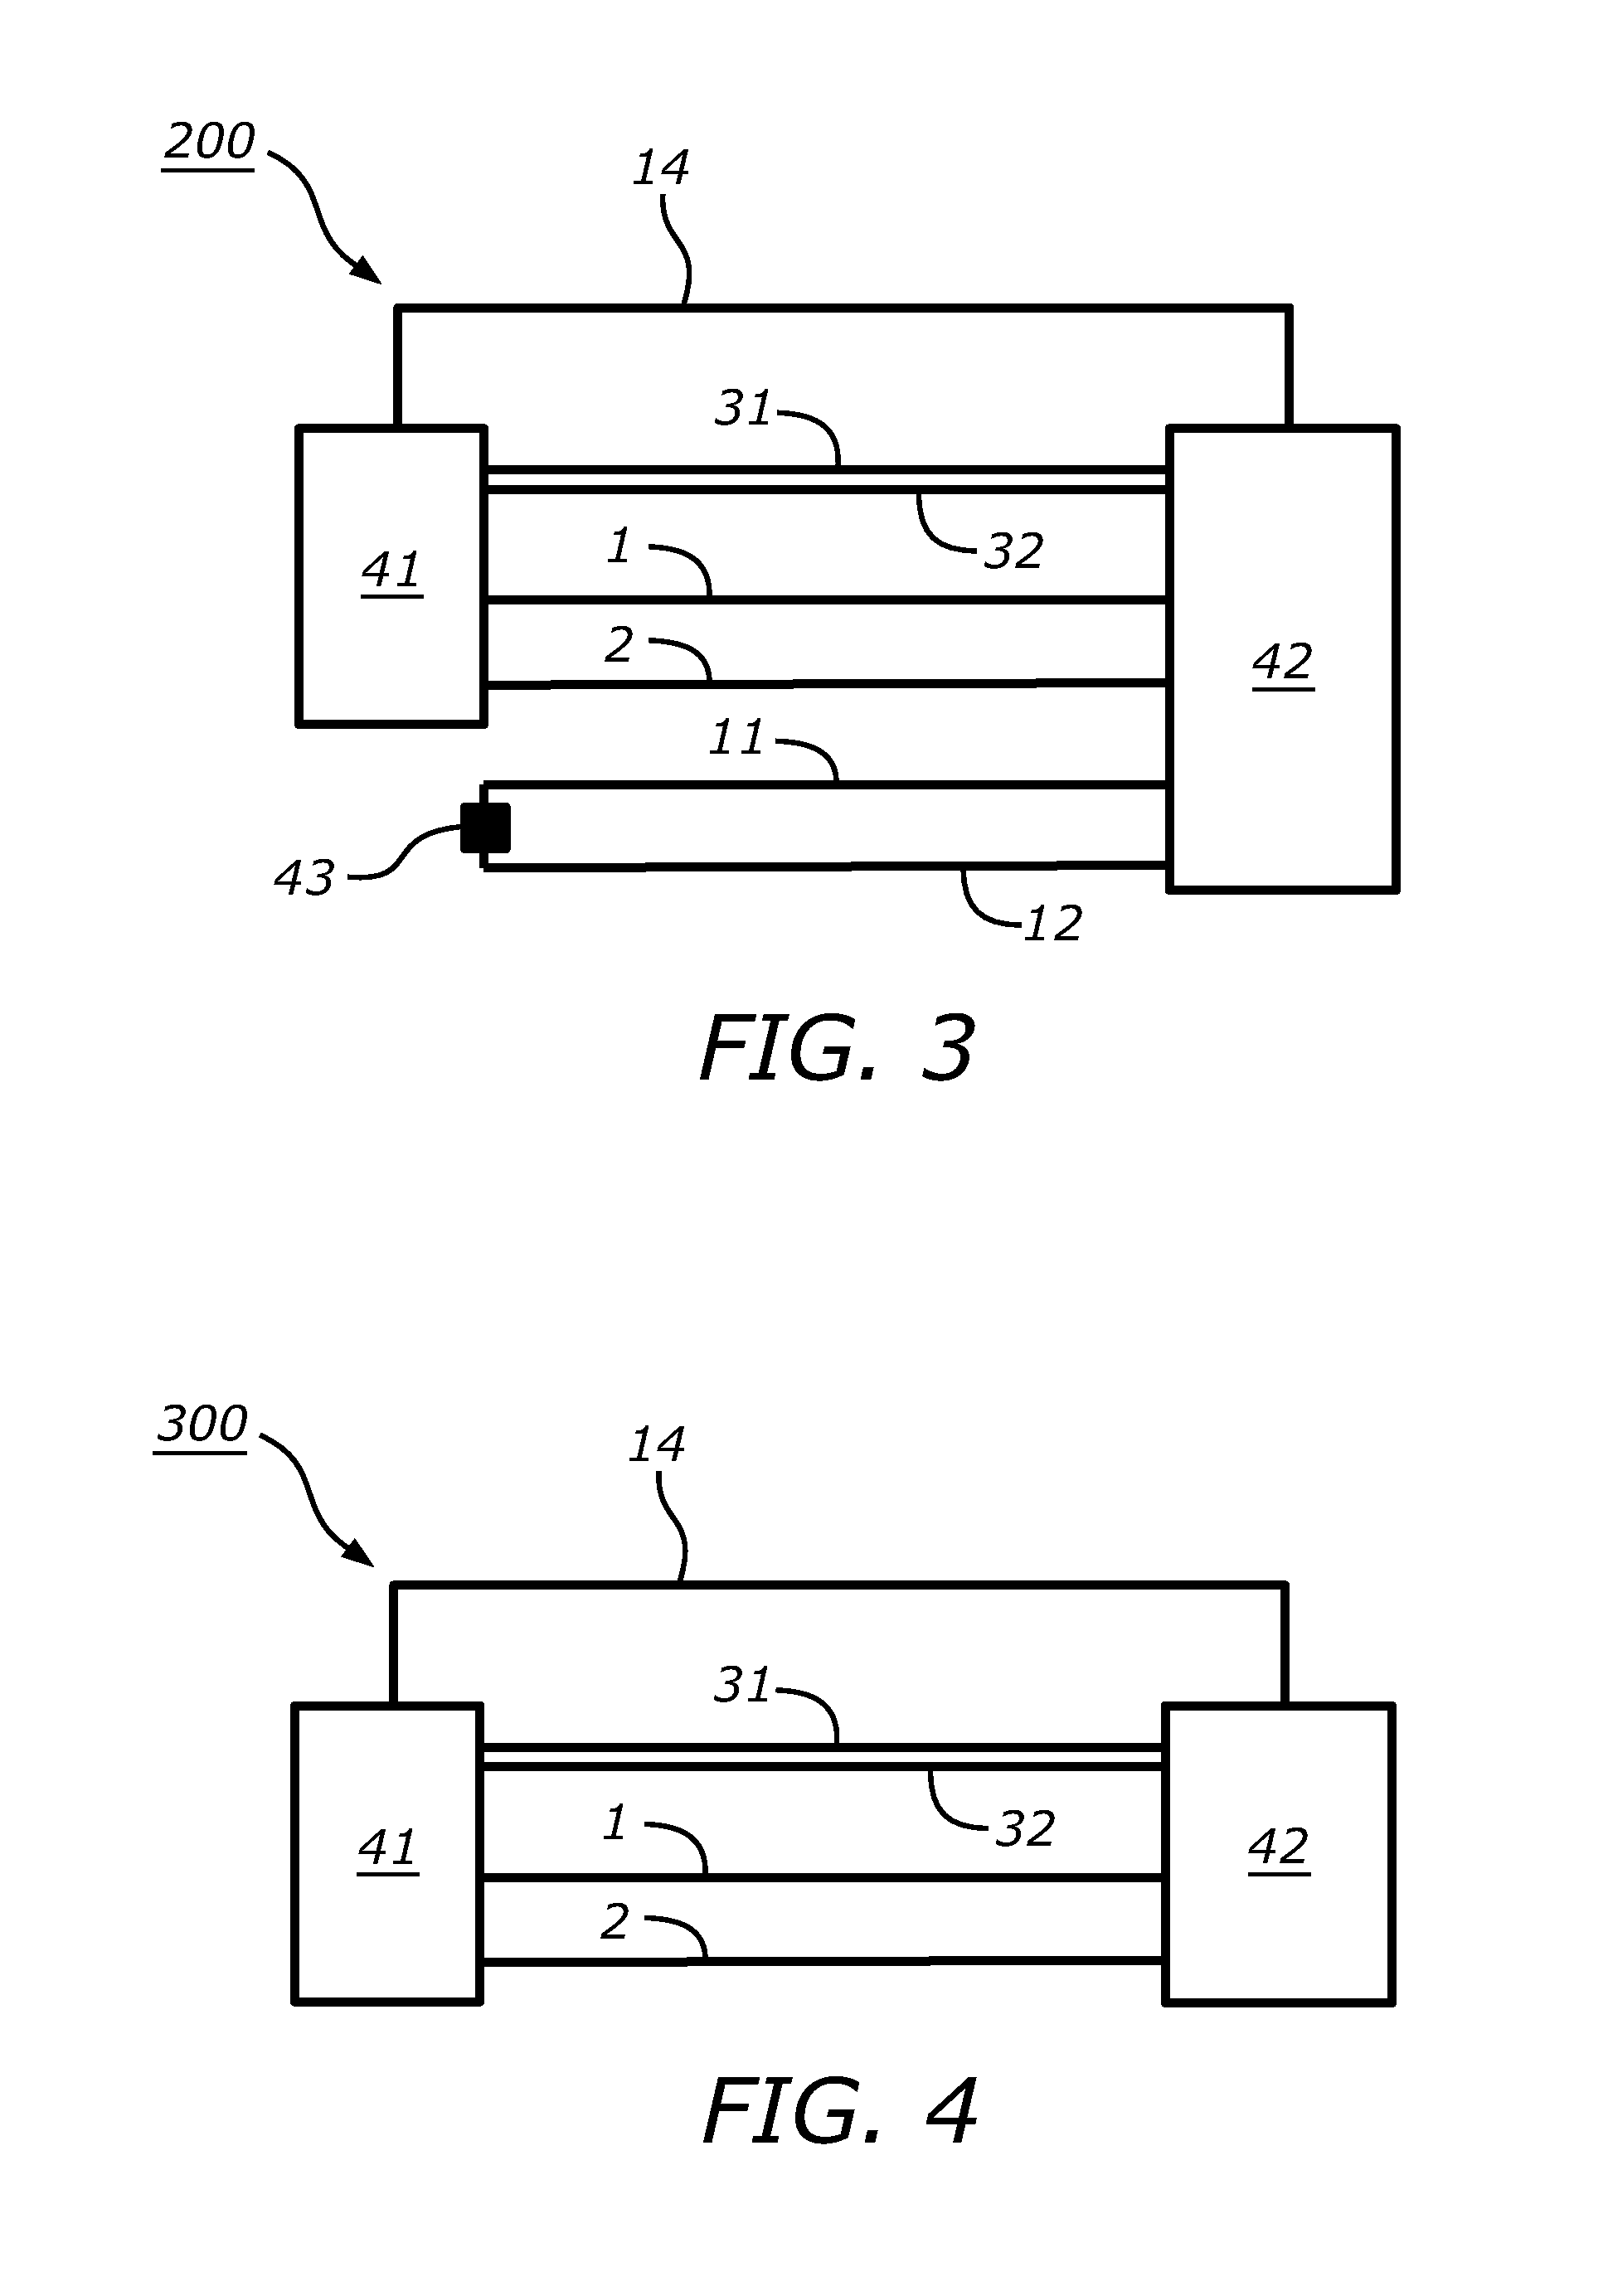 Signal measuring system, method for electrically conducting signals and a signal cable